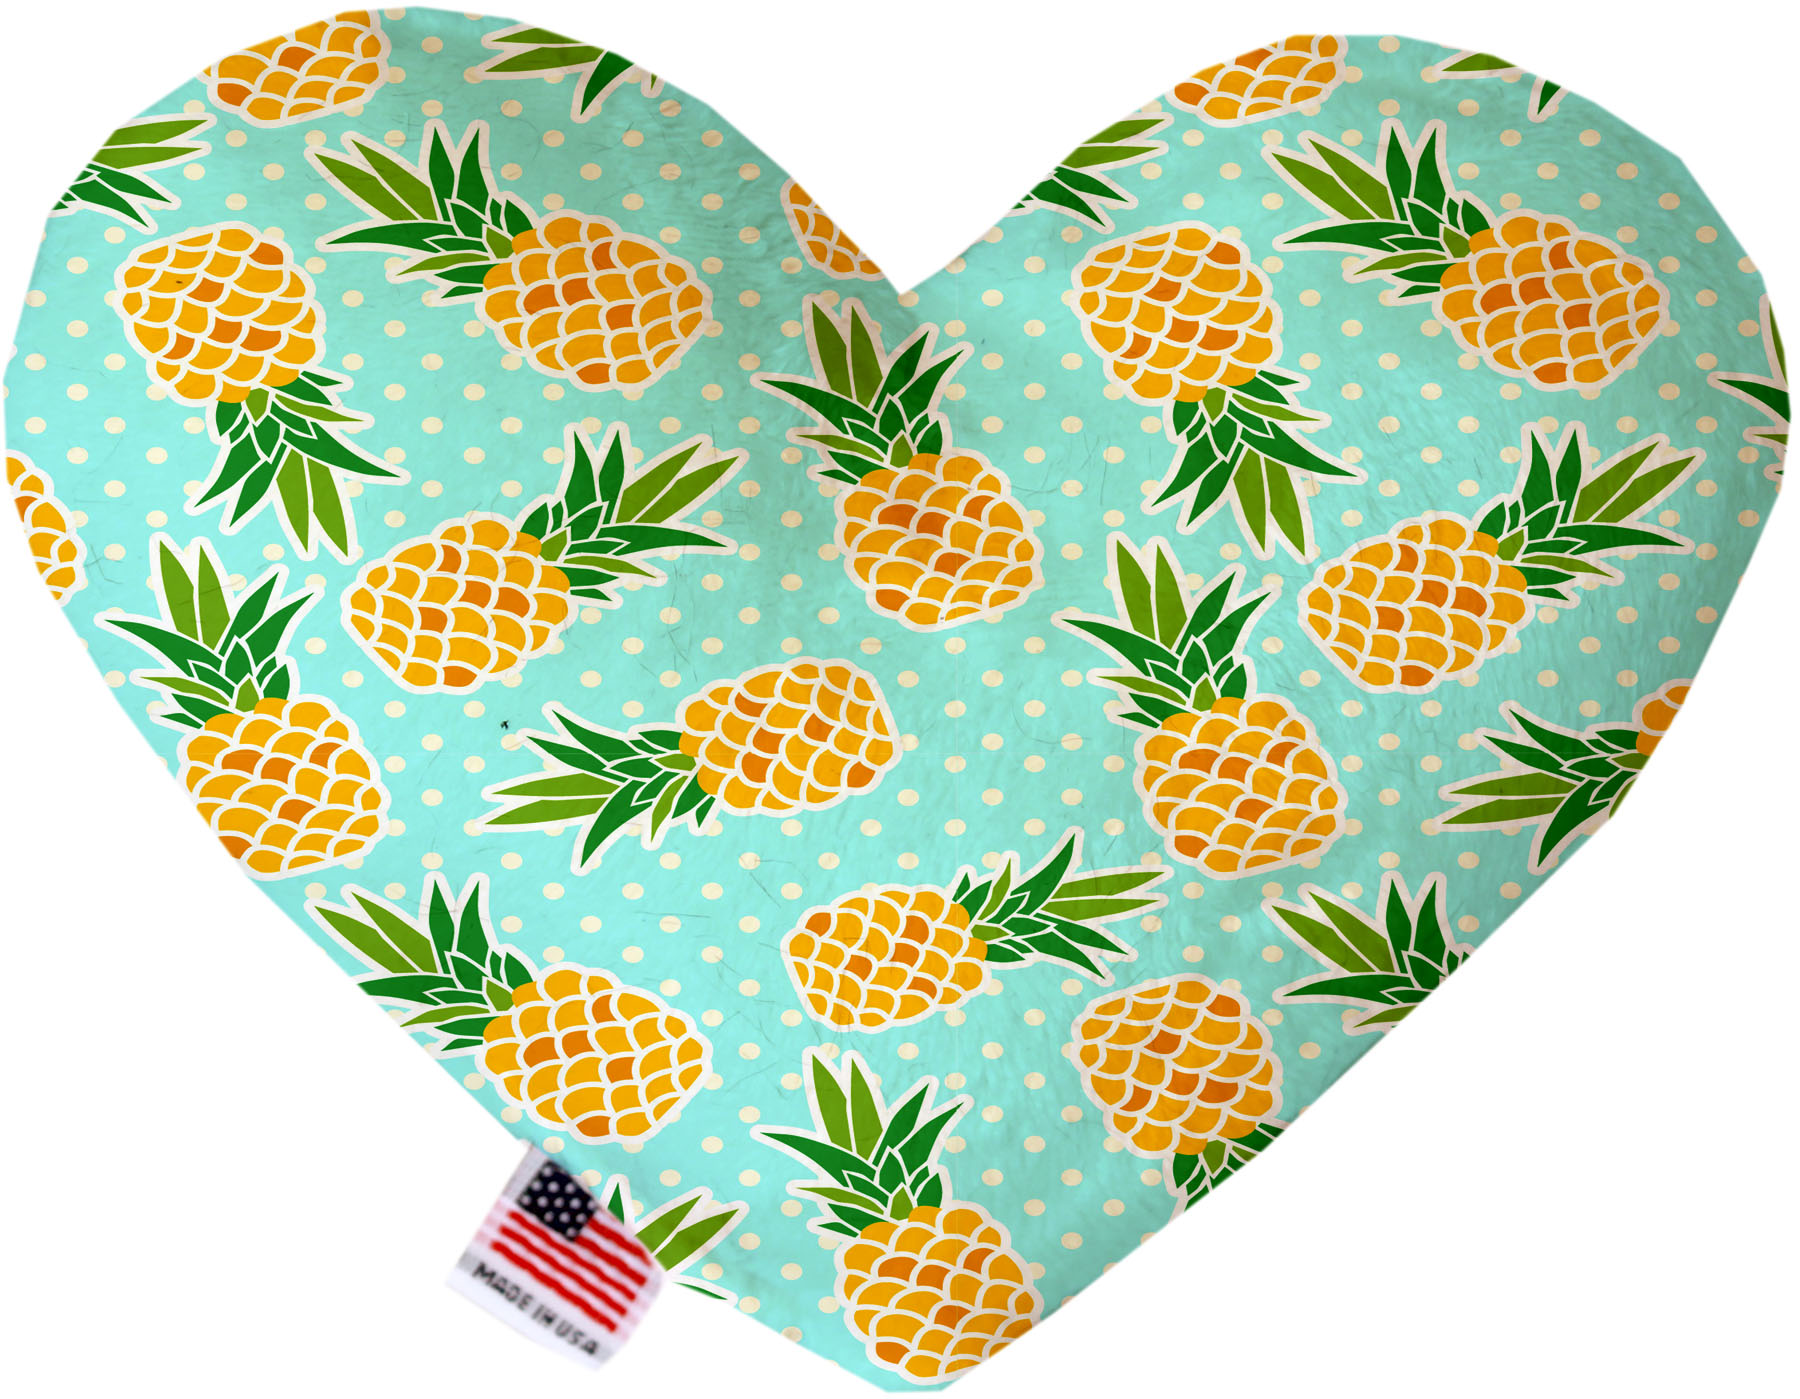 Pineapples and Polka Dots 8 inch Heart Dog Toy